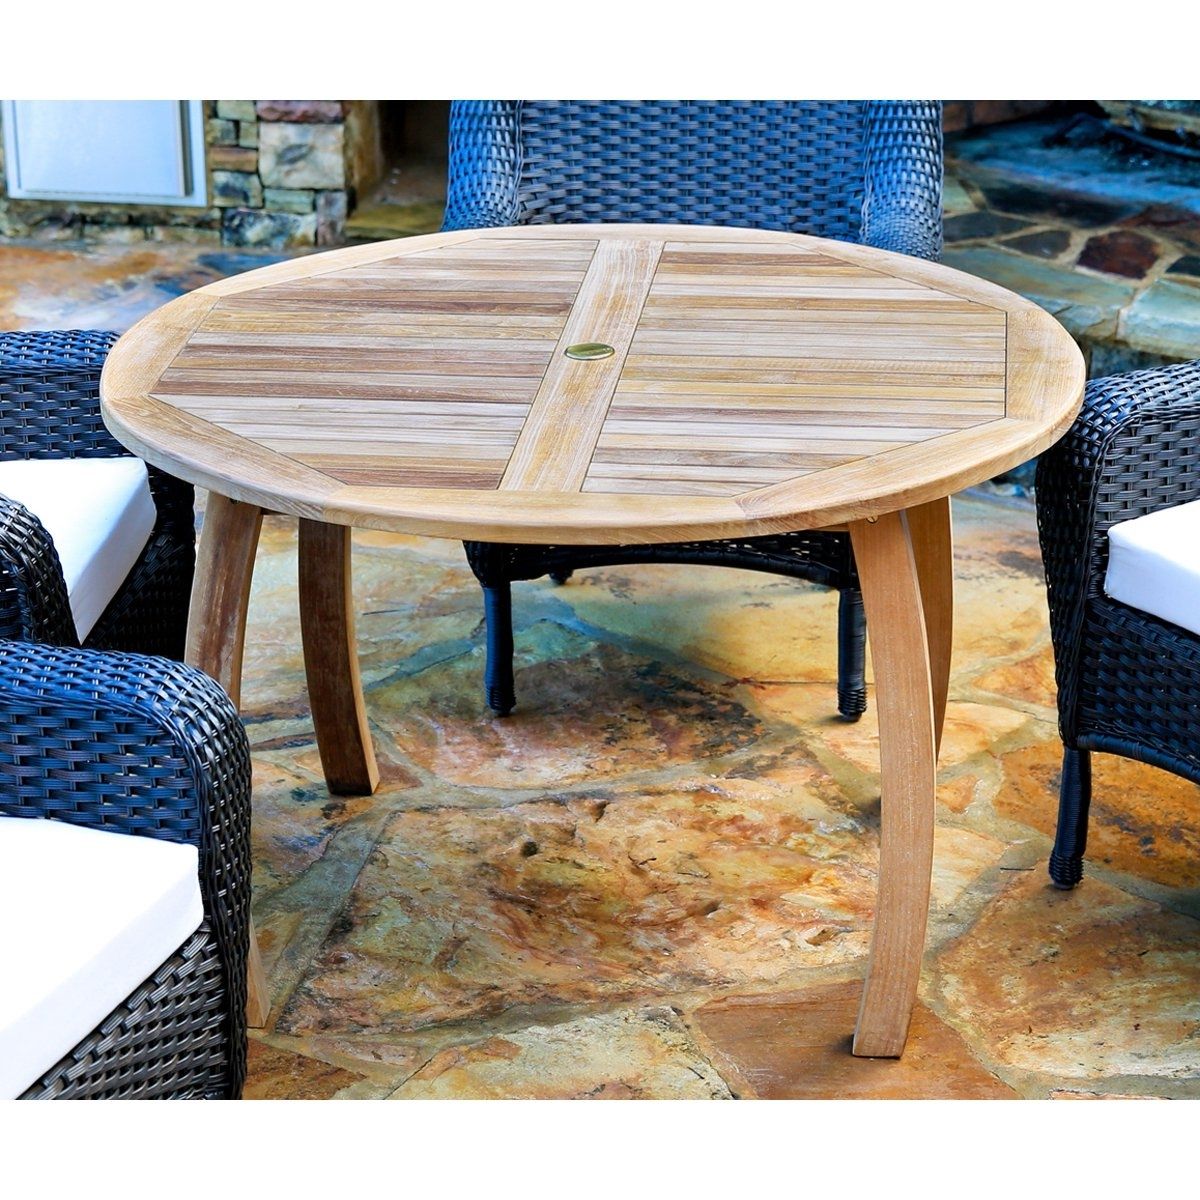 Outdoor Tortuga Dining Tables Pertaining To Latest Shop Tortuga Outdoor Teak 48 Inch Dining Table – On Sale – Free (View 1 of 25)